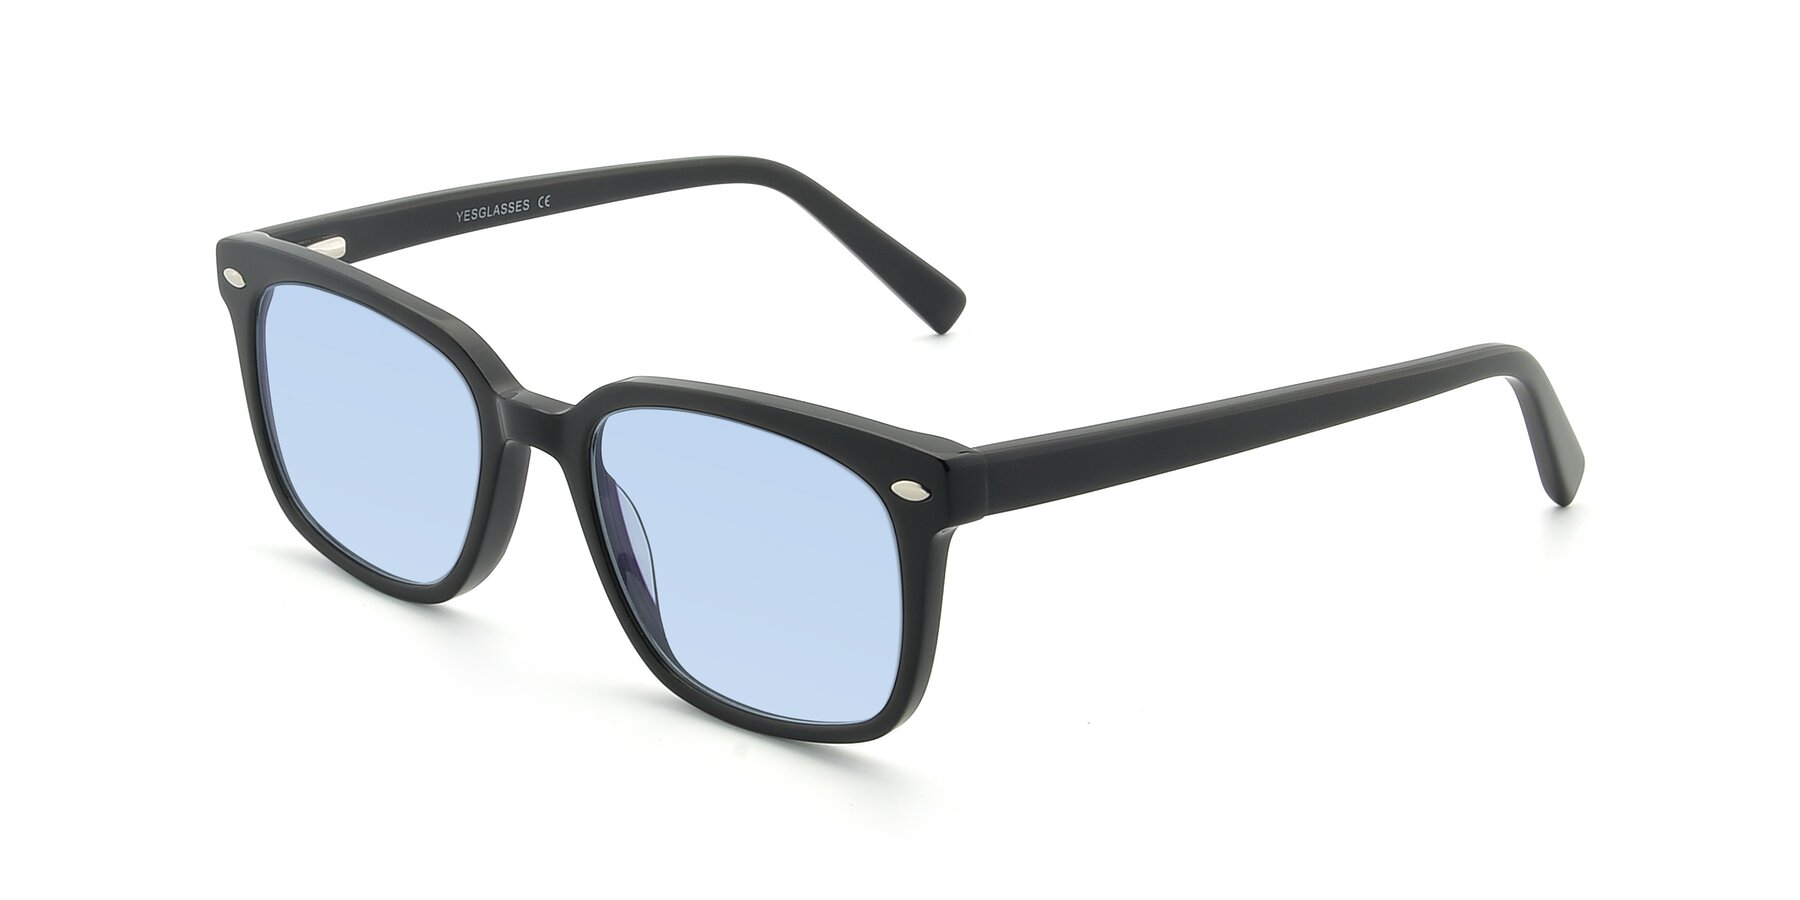 Angle of 17349 in Black with Light Blue Tinted Lenses